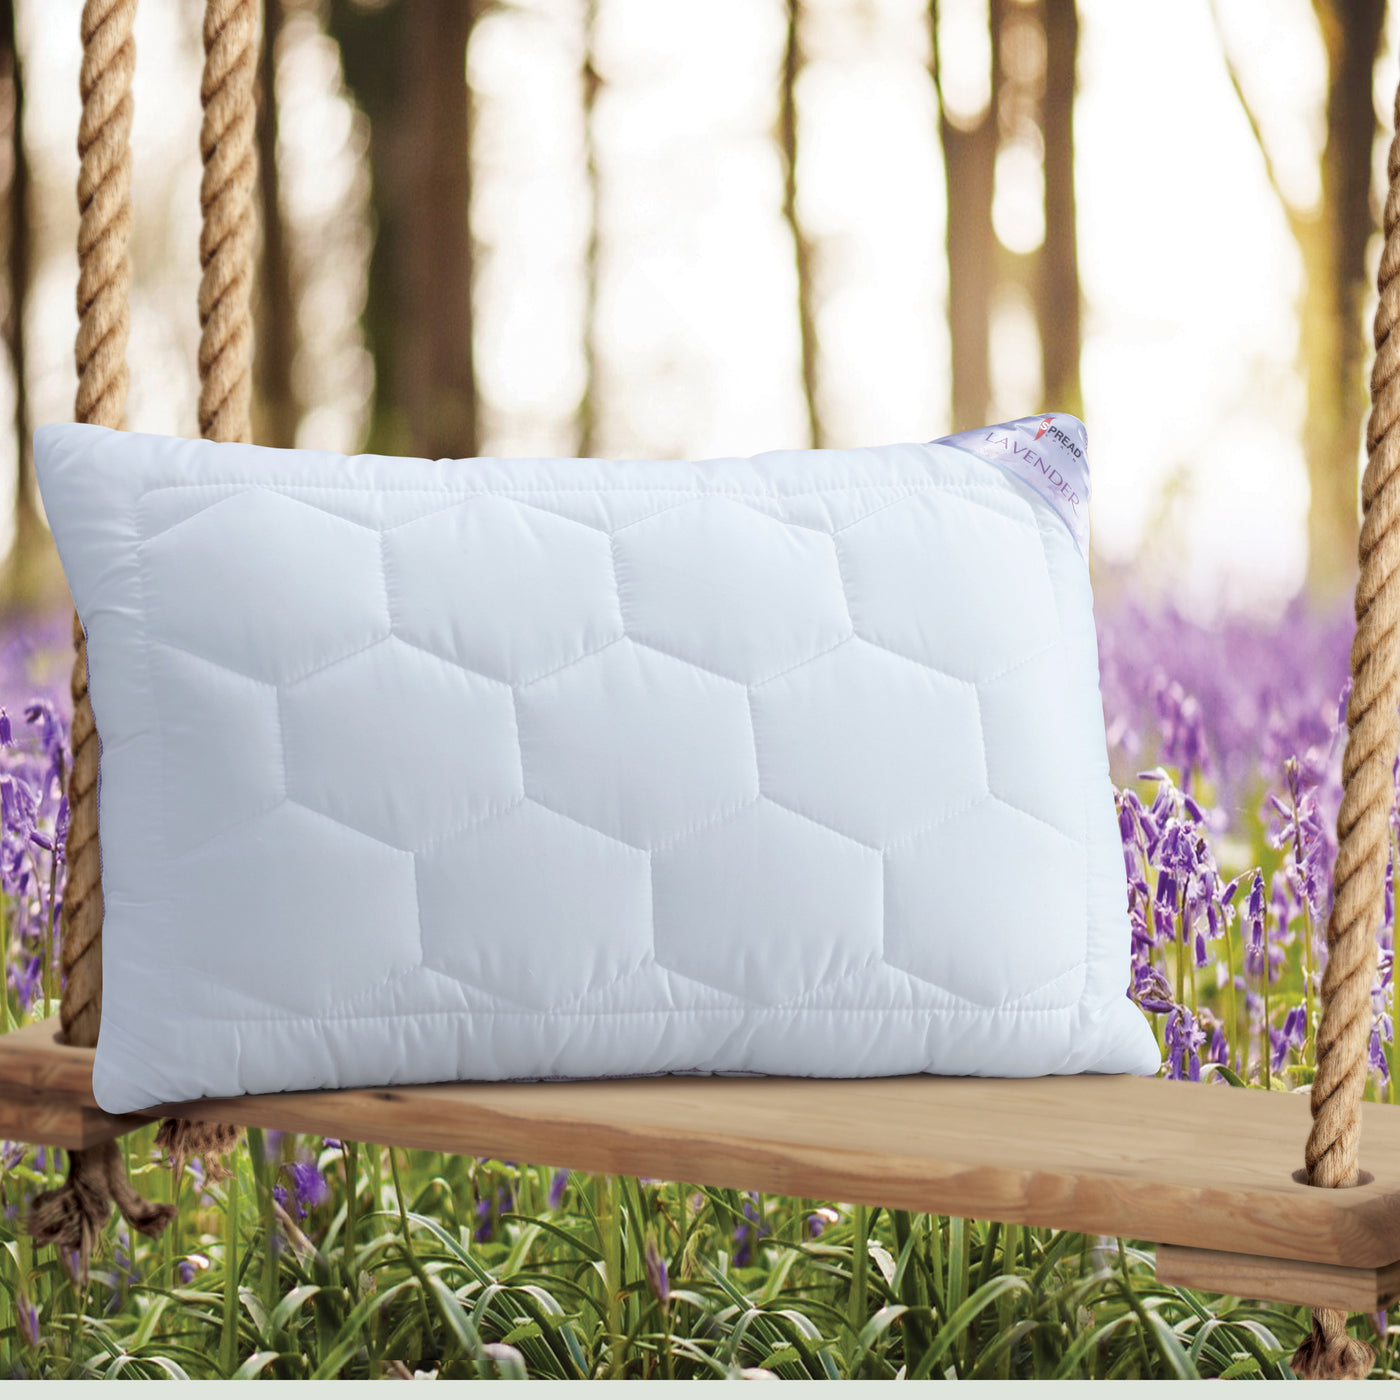 Lavender With Suede Fabric And Micro Fibre Inside Pillow